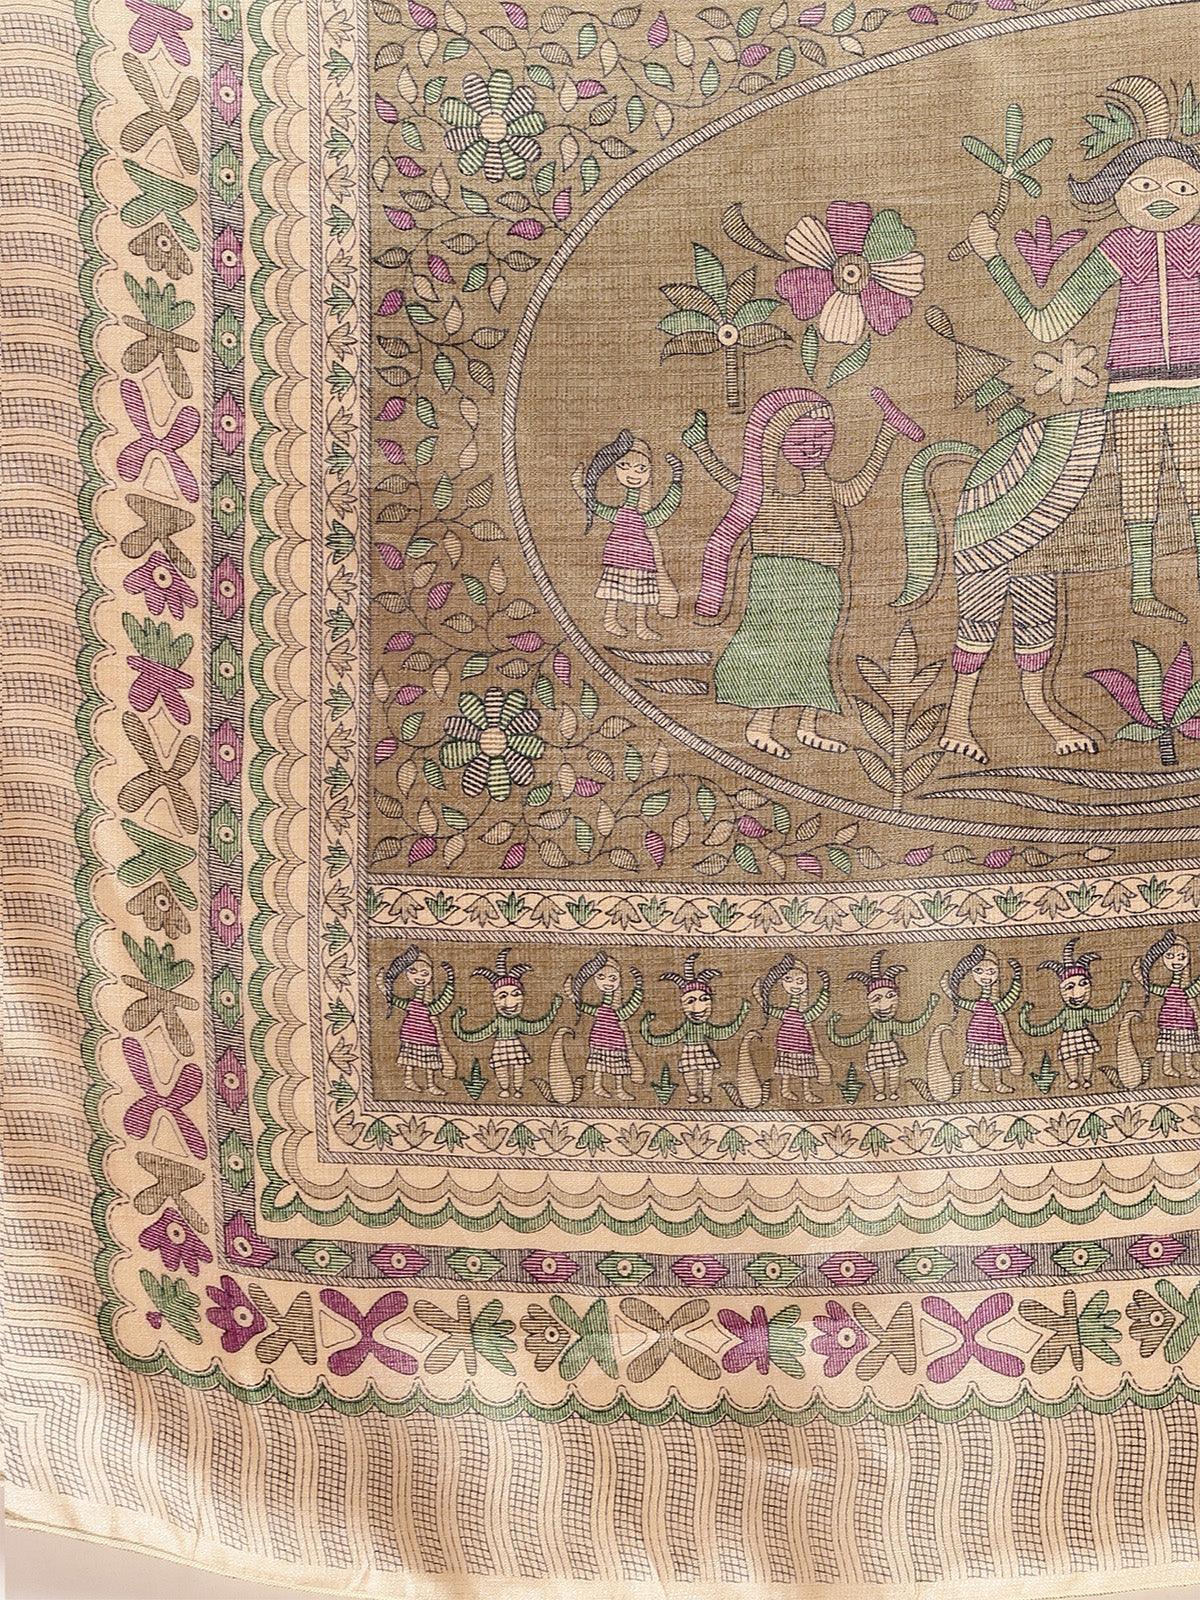 Khadi Silk Olive Printed Saree With Blouse Piece - Odette